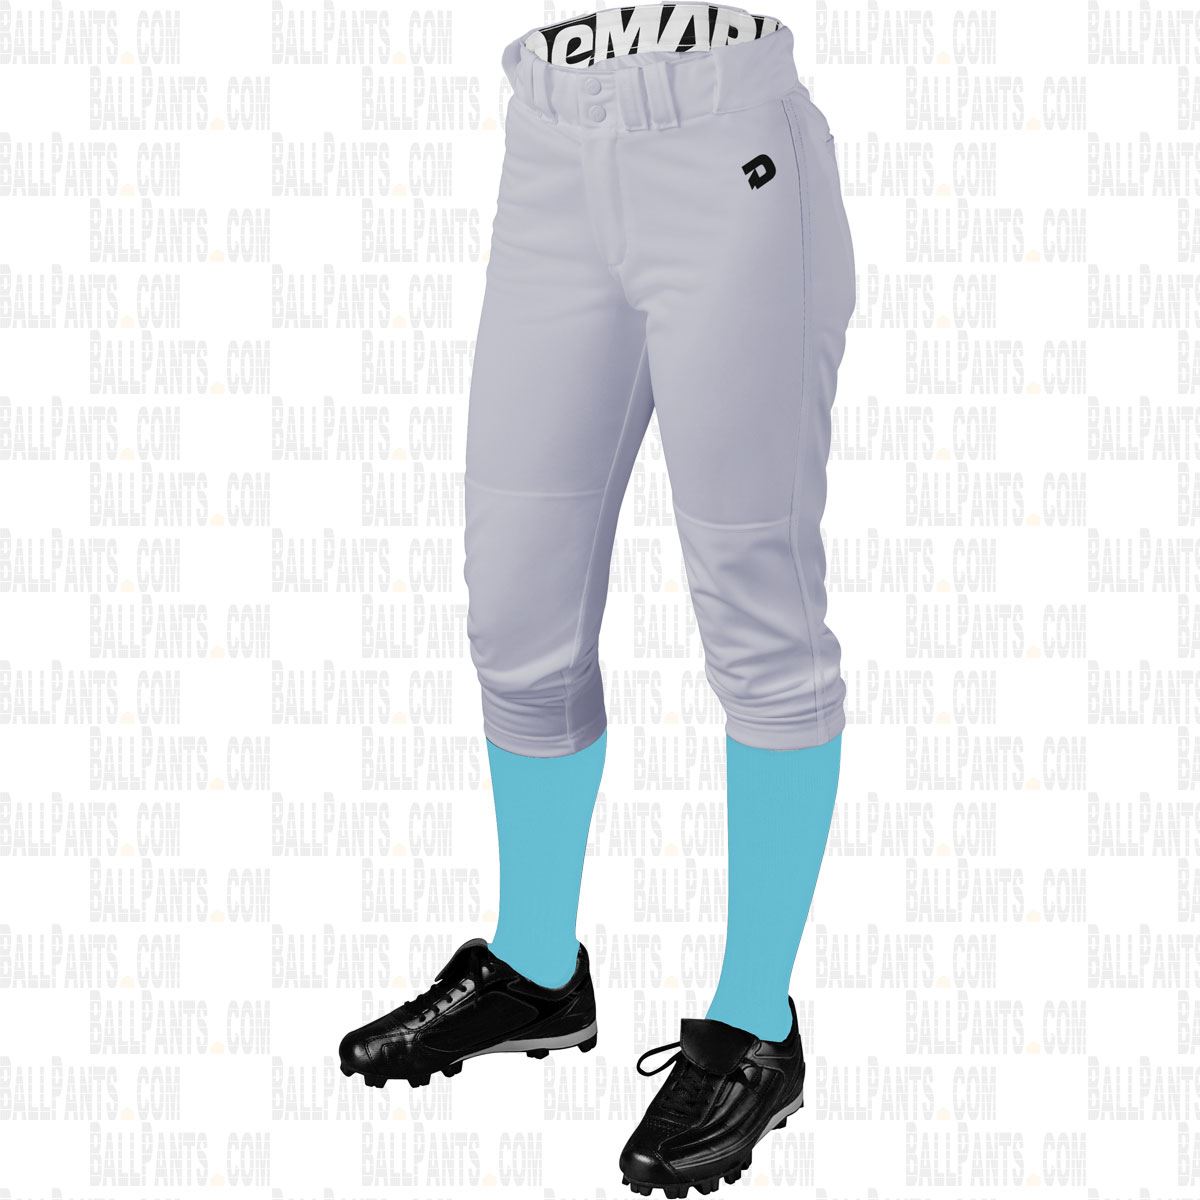 Grey Black DeMarini Deluxe Adult Womens Fastpitch Softball Pants WTC7605 White